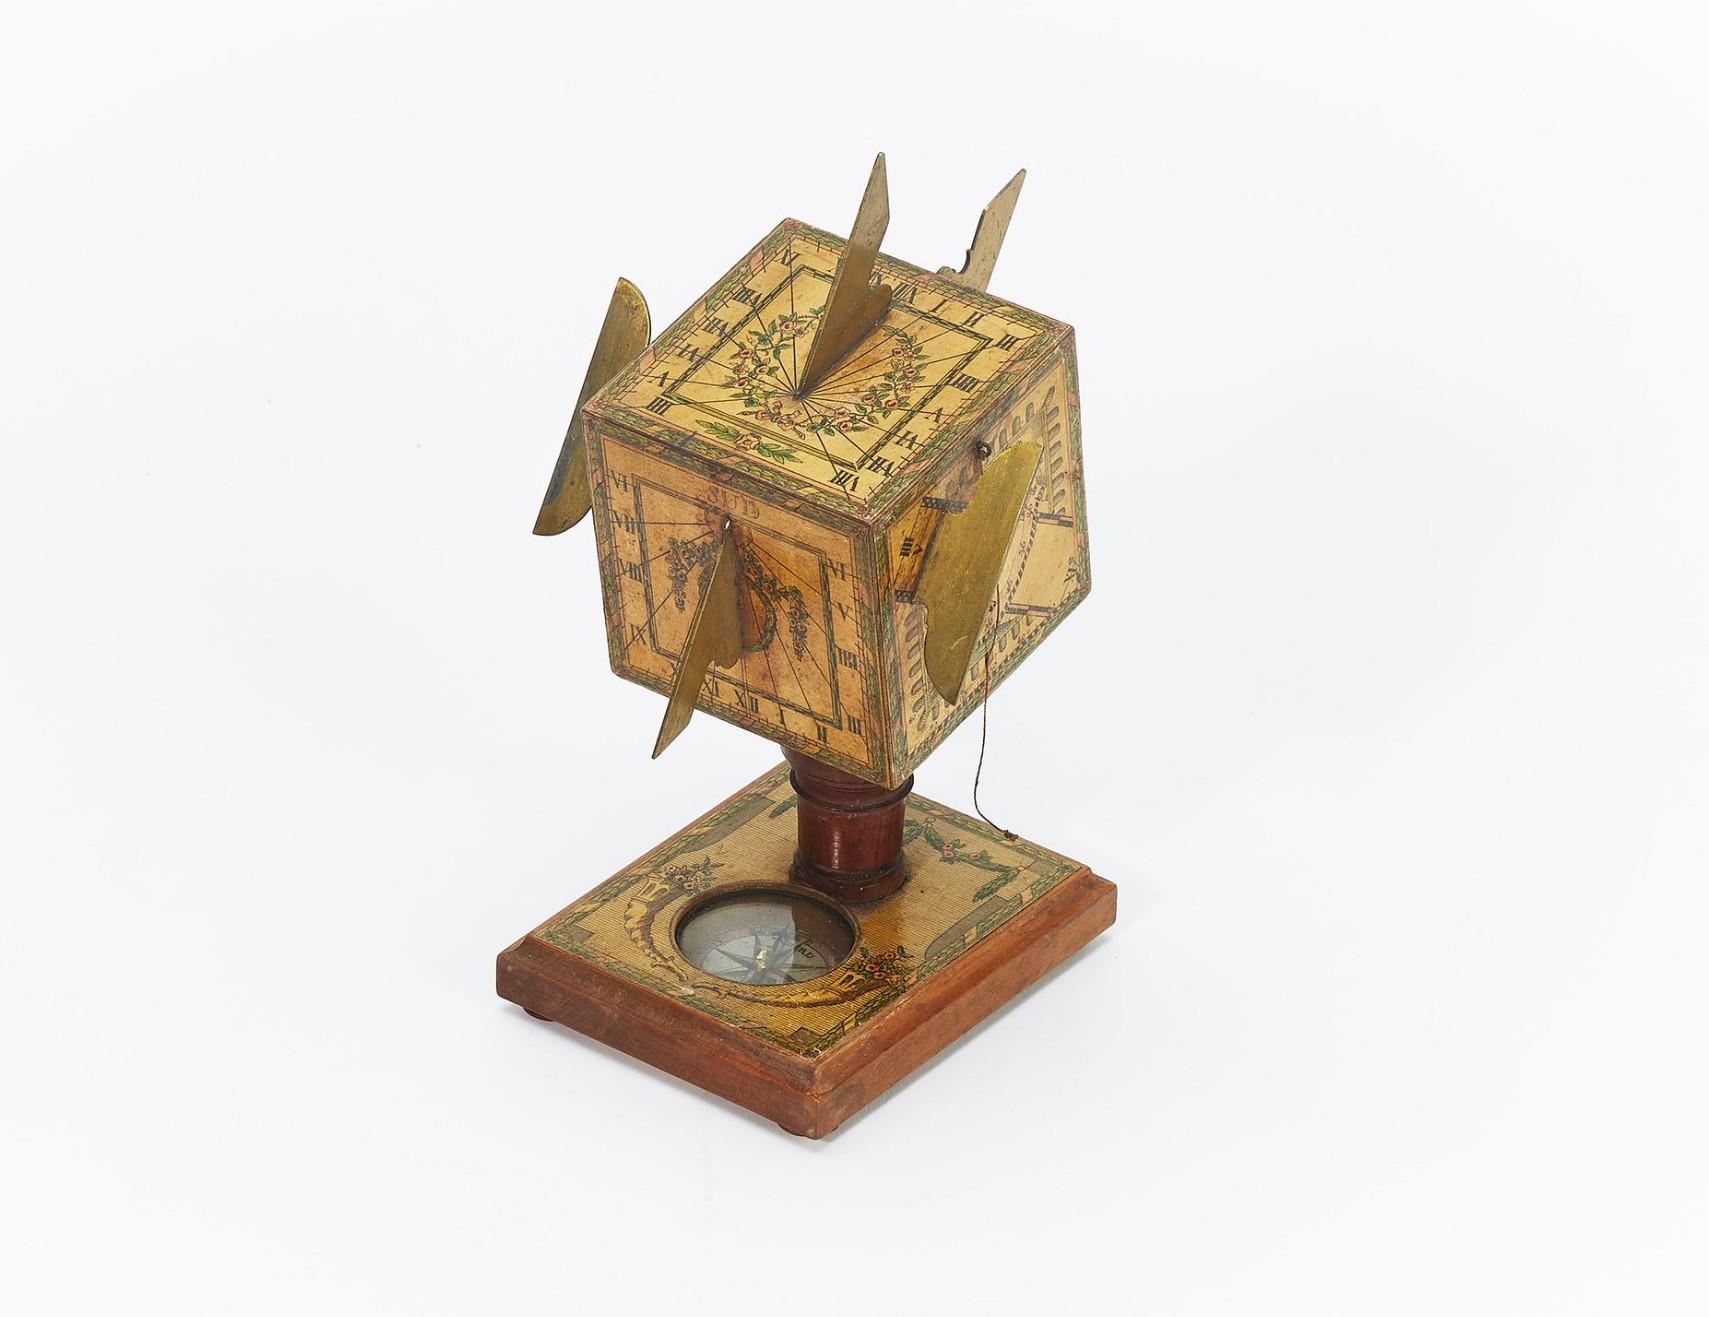 Shipping policy
No additional costs will be added to this order.
Shipping costs will be totally covered by the seller (customs duties included). 

DAVID BERINGER (1756-1821)
The fruitwood cube with coloured paper applied to each face, stamped